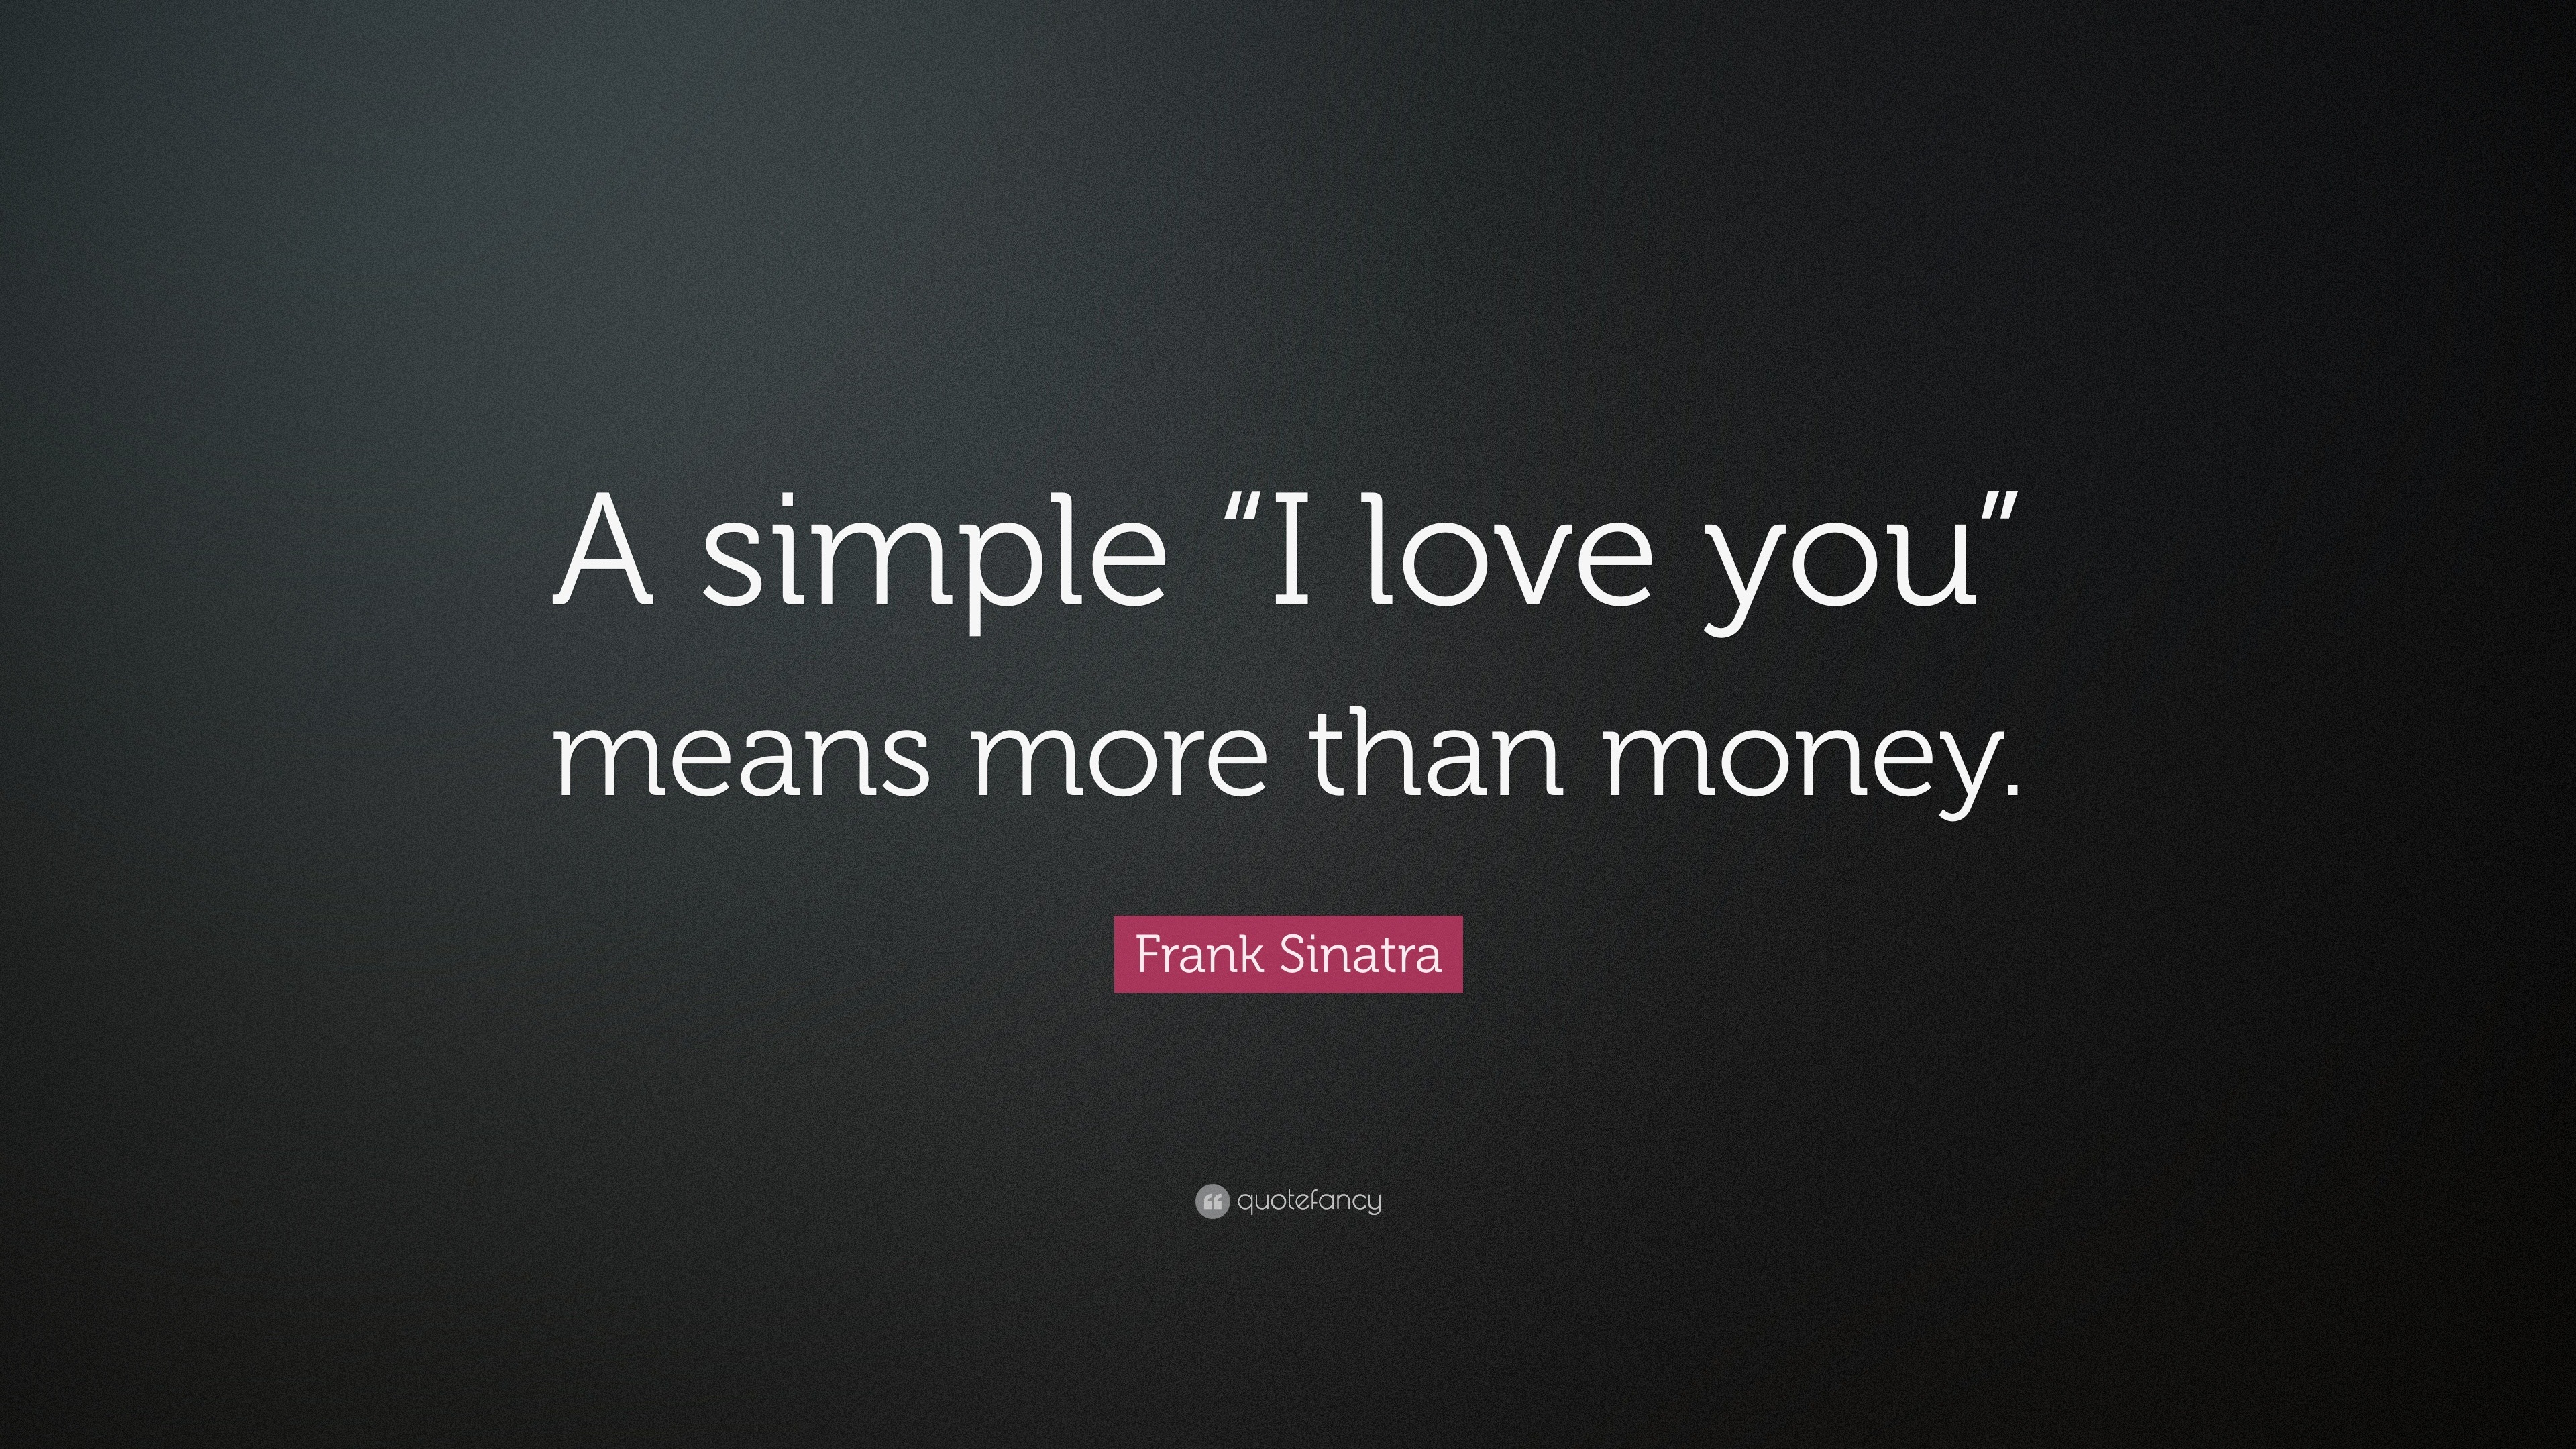 Frank Sinatra Quote “a Simple “i Love You” Means More Than Money”